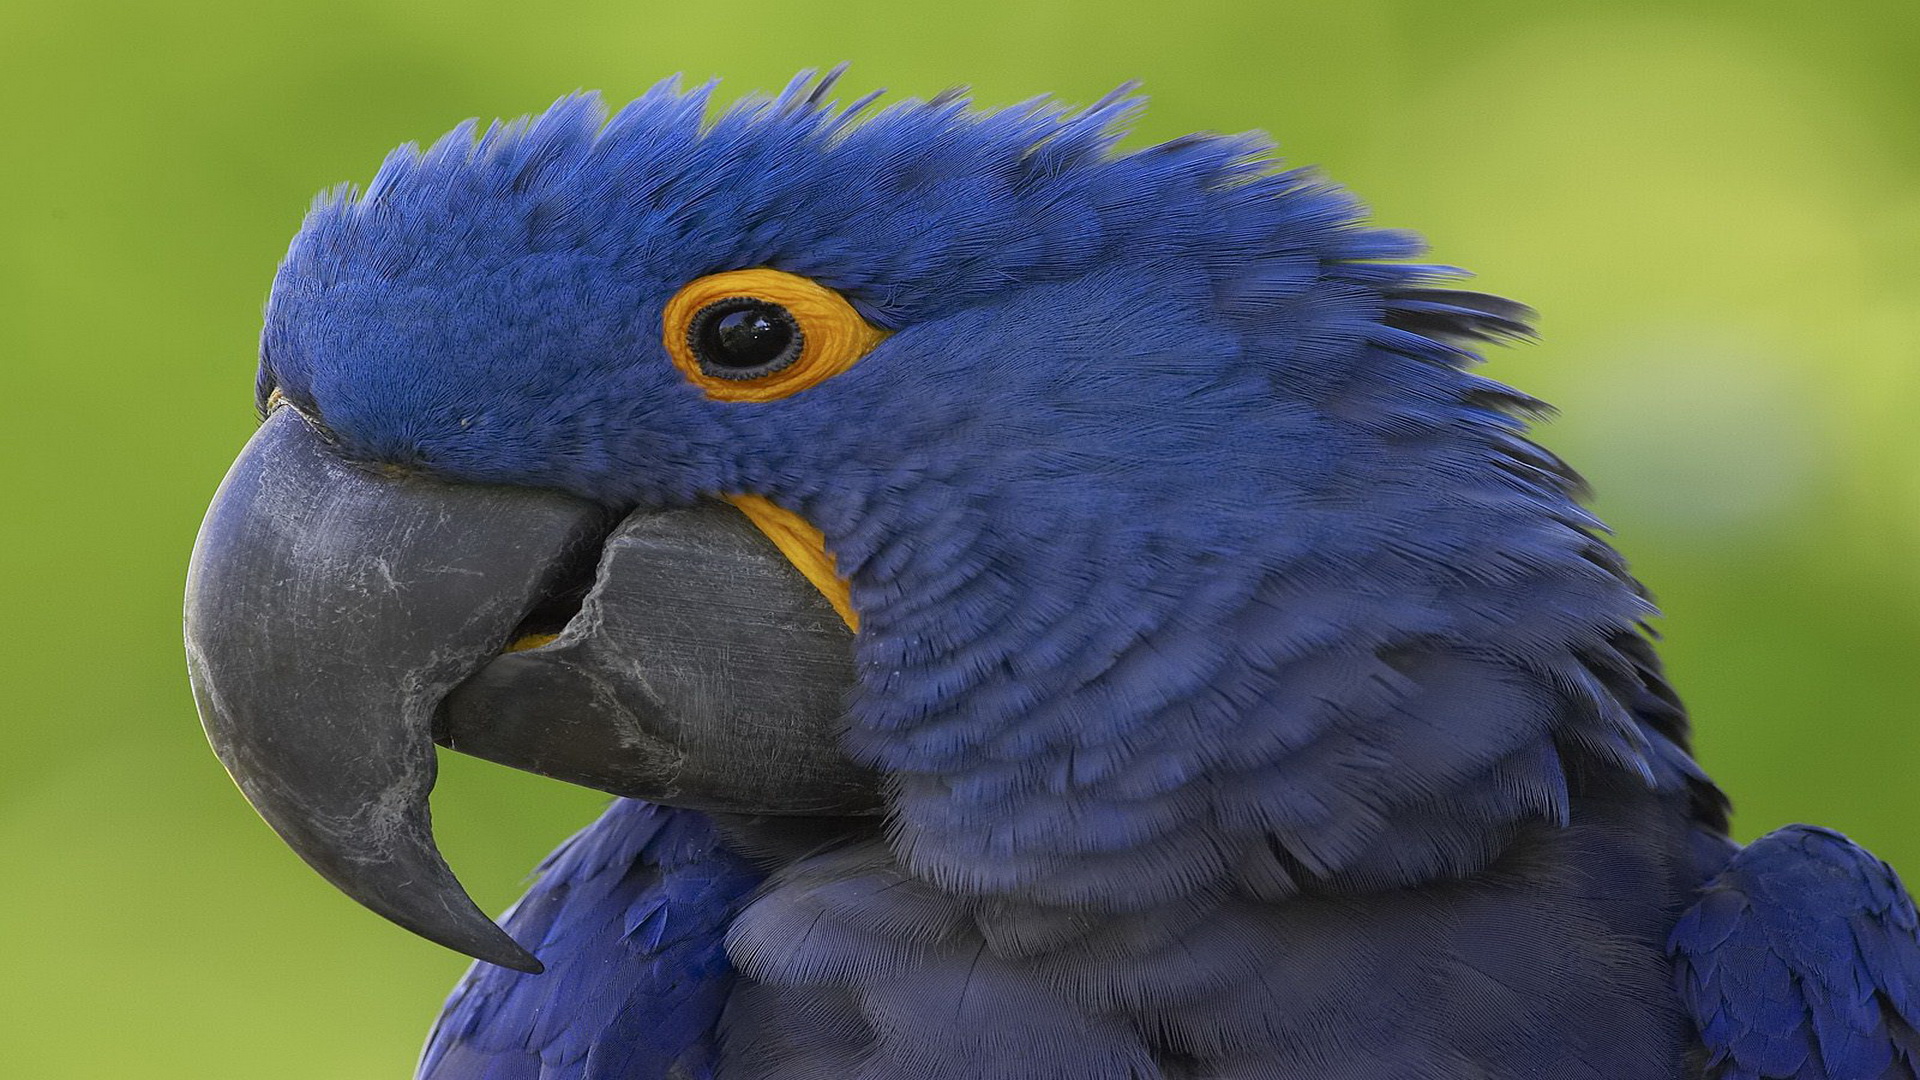 Animal Wallpapers Backgrounds hyacinth macaw HD Wallpapersjpg 1920